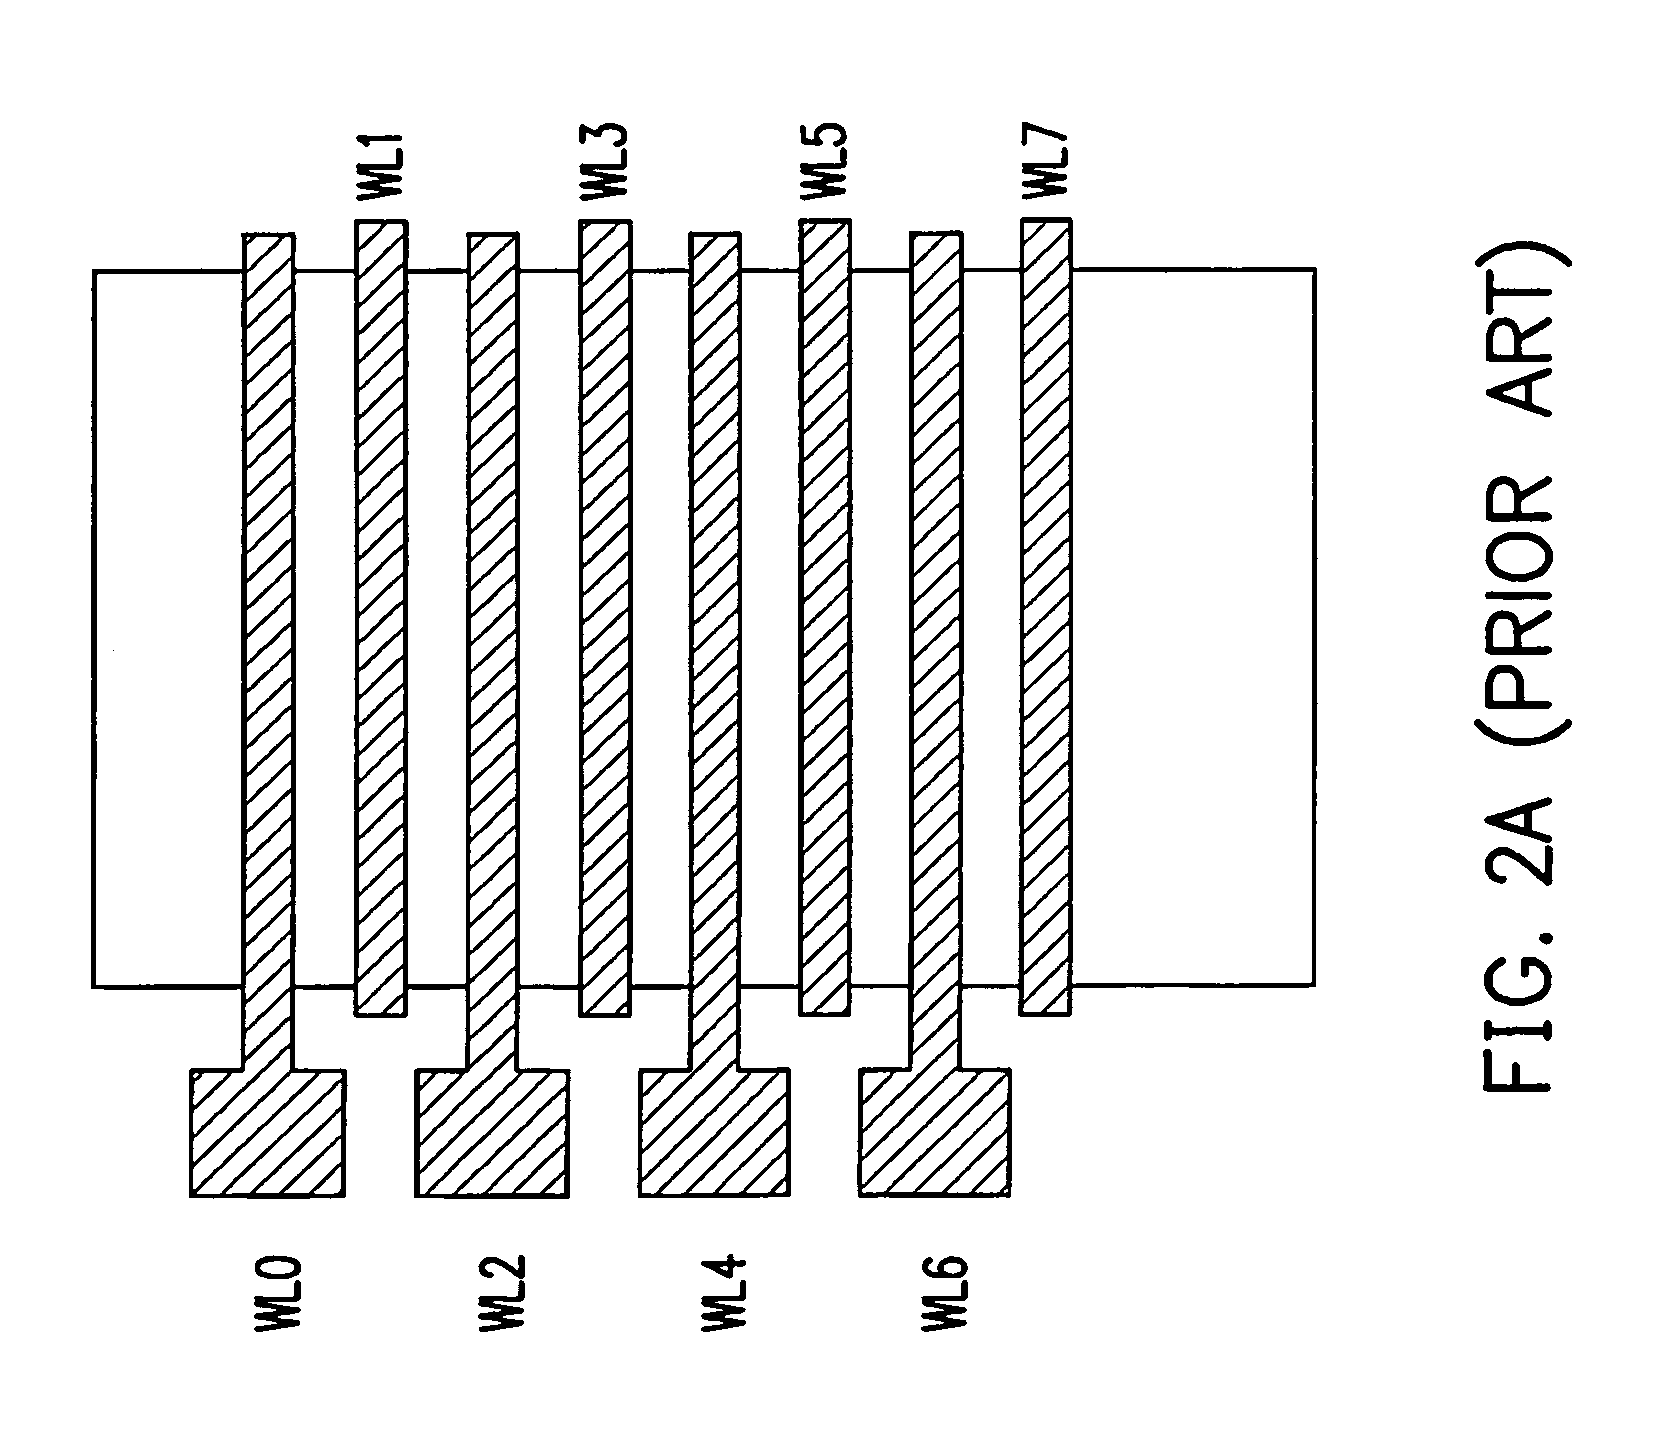 Operation method of nitride-based flash memory and method of reducing coupling interference